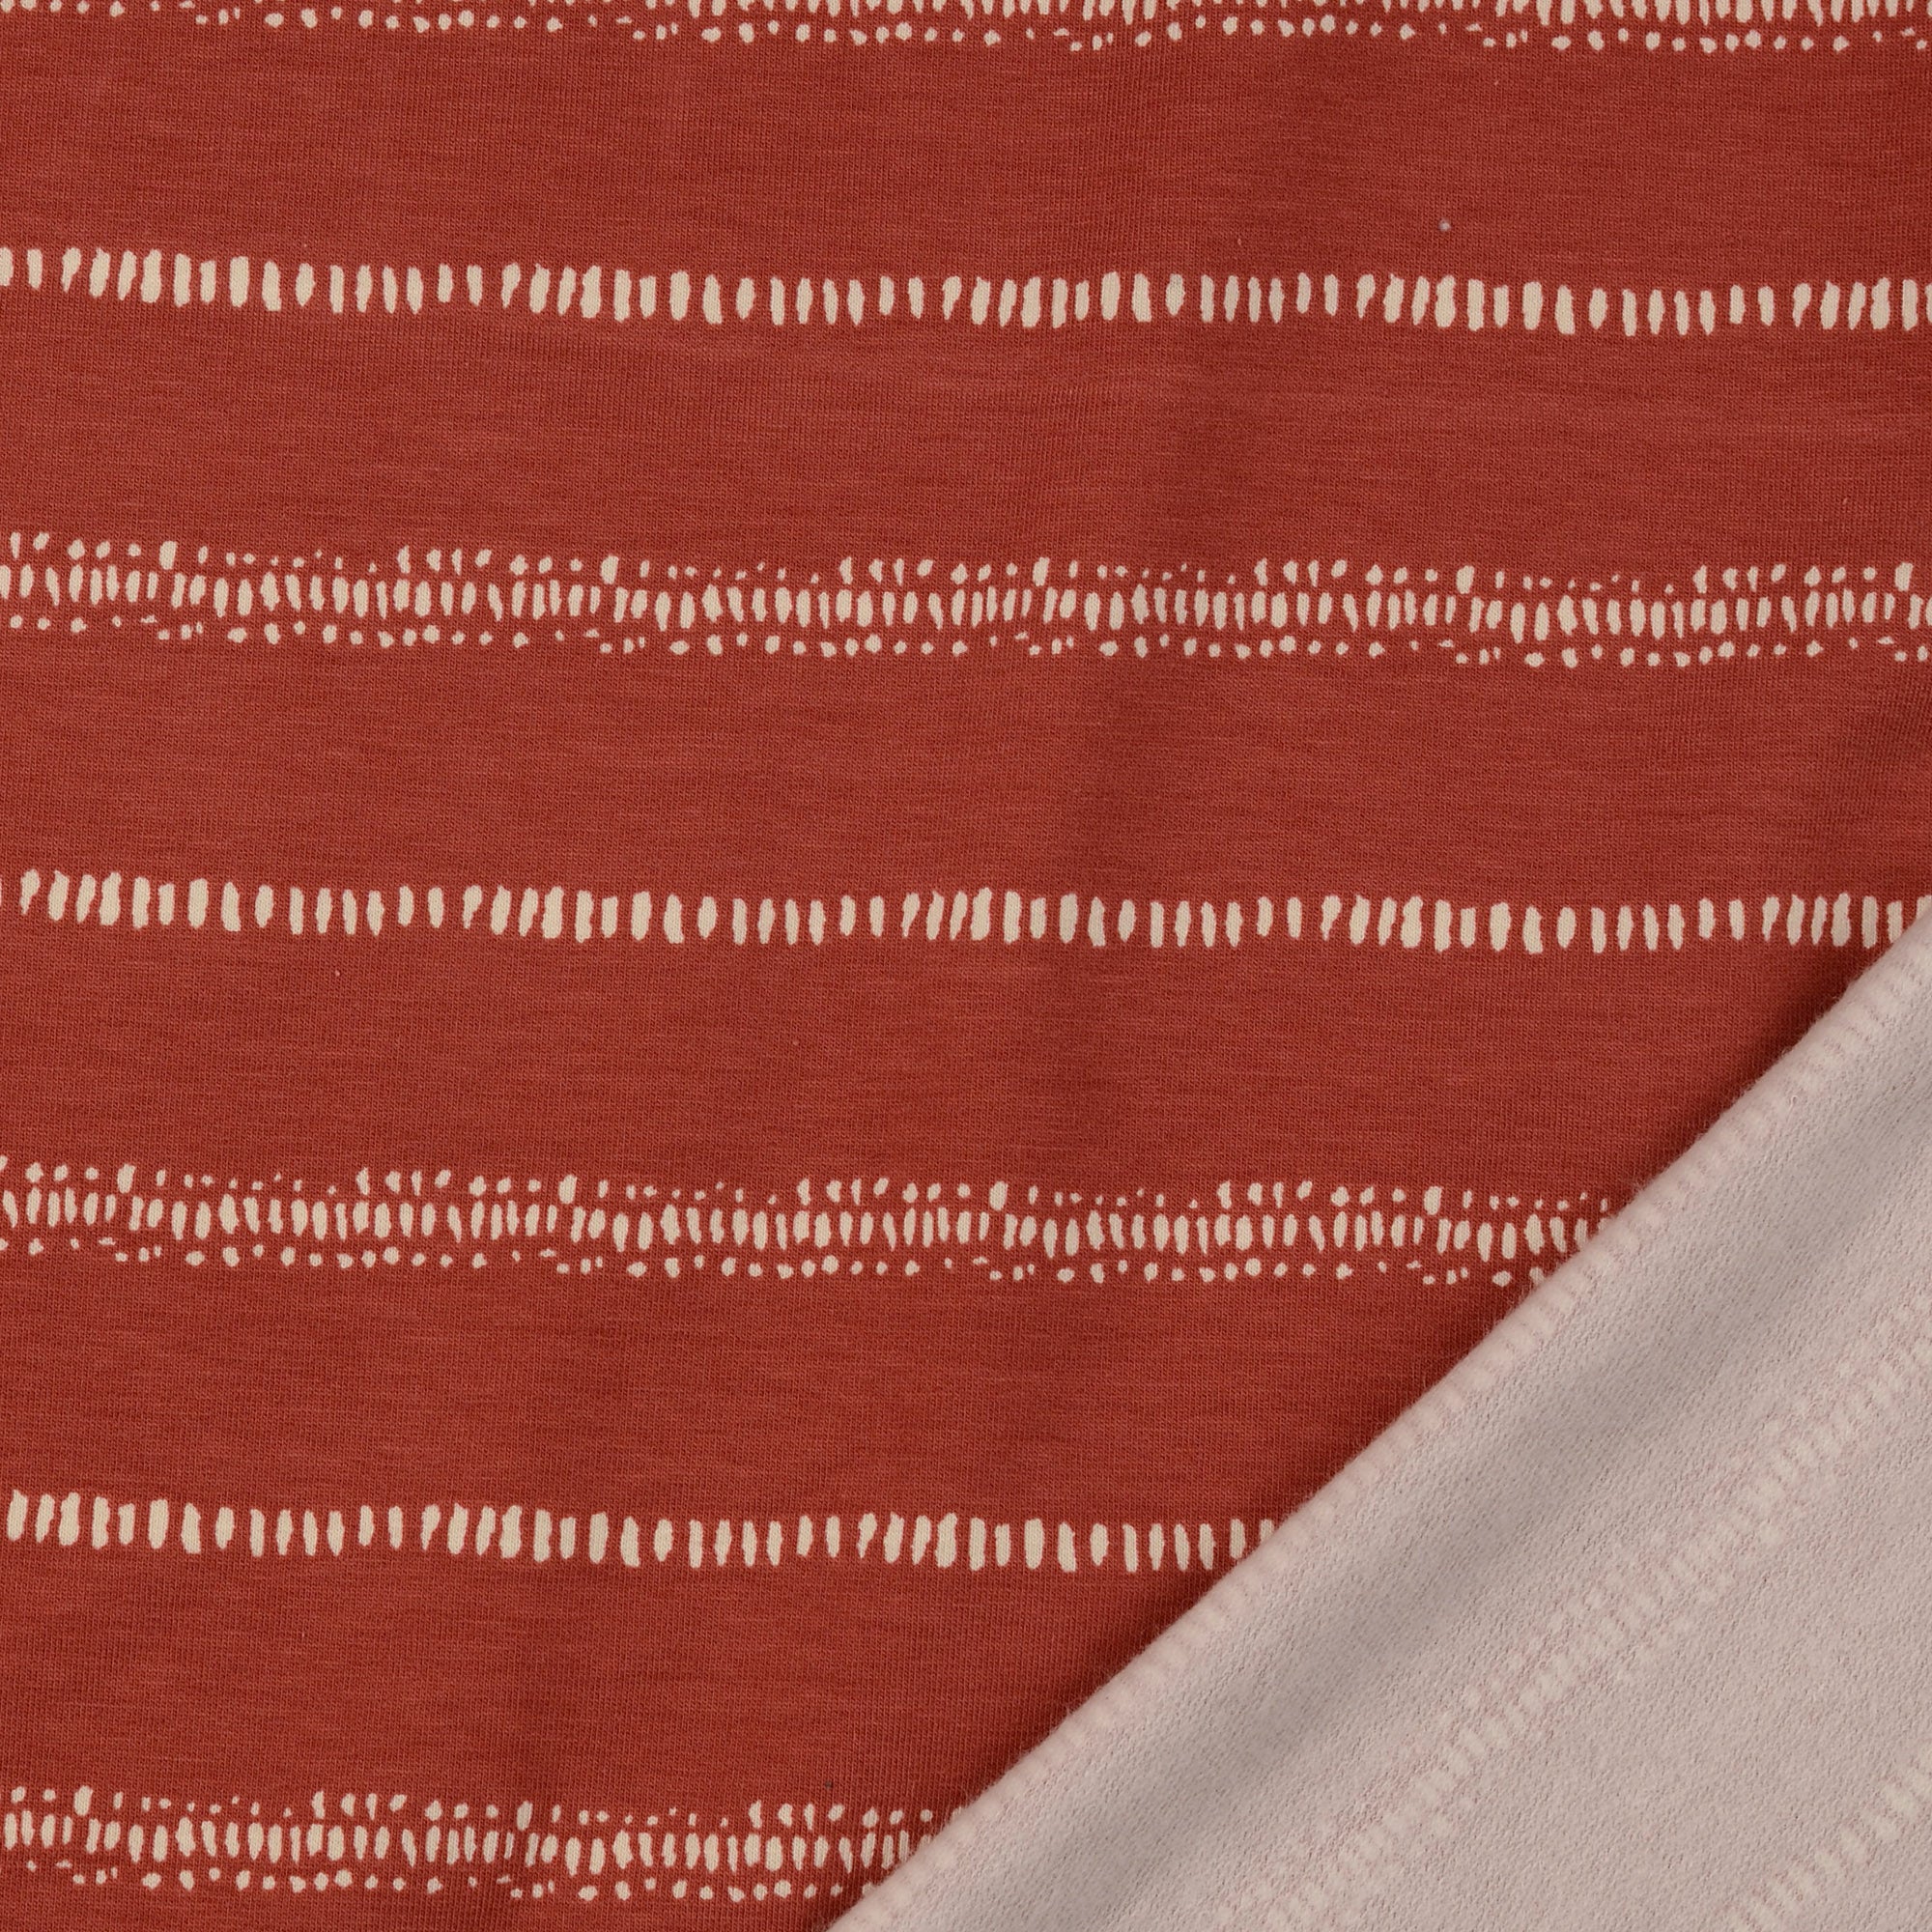 Broken Lines on Tandoori Spice Cotton French Terry Fabric